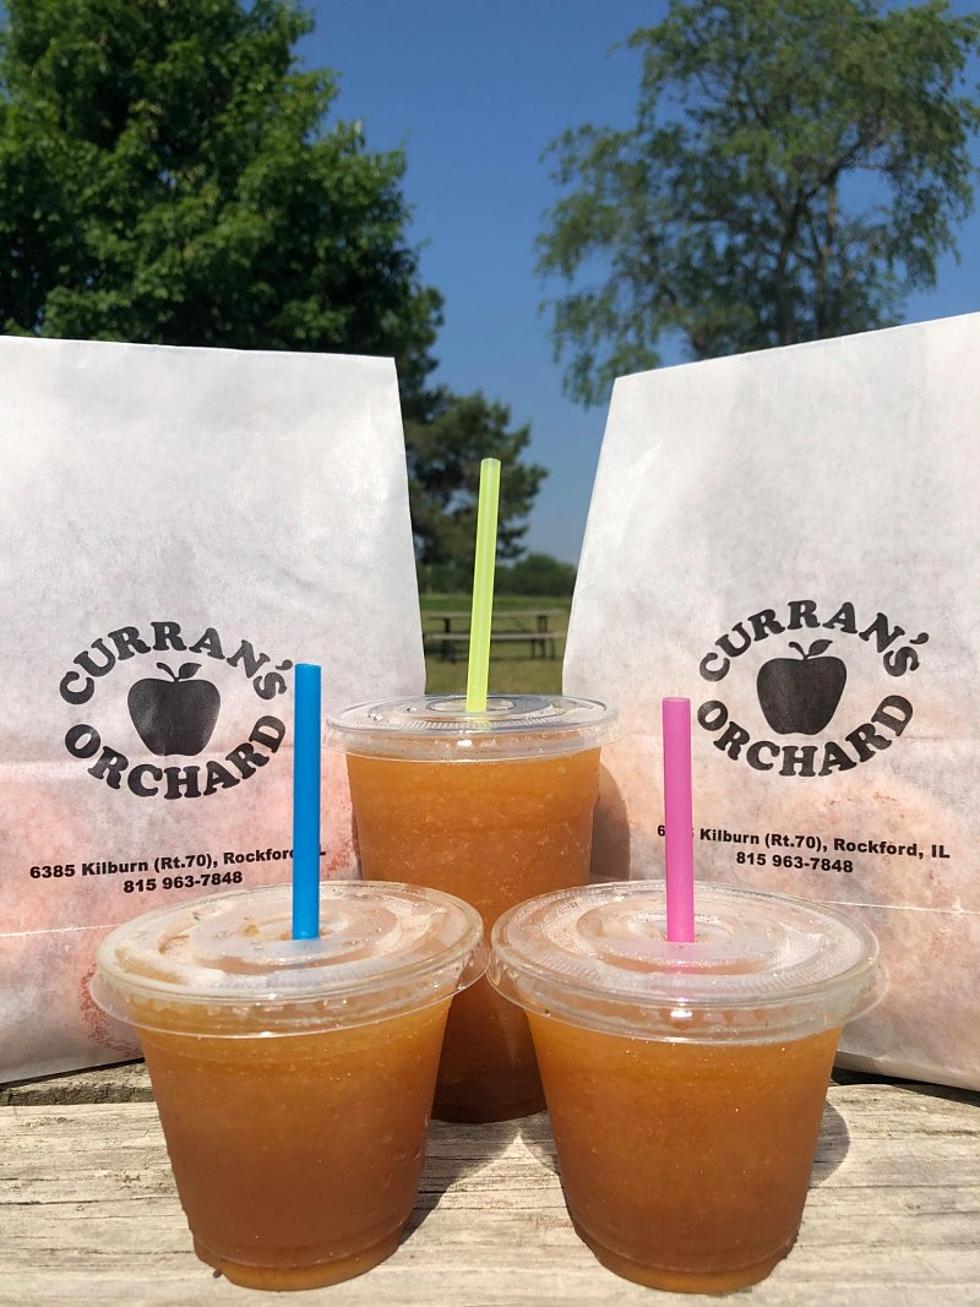 Last Call for Summer Treats at Curran's Orchard in Rockford